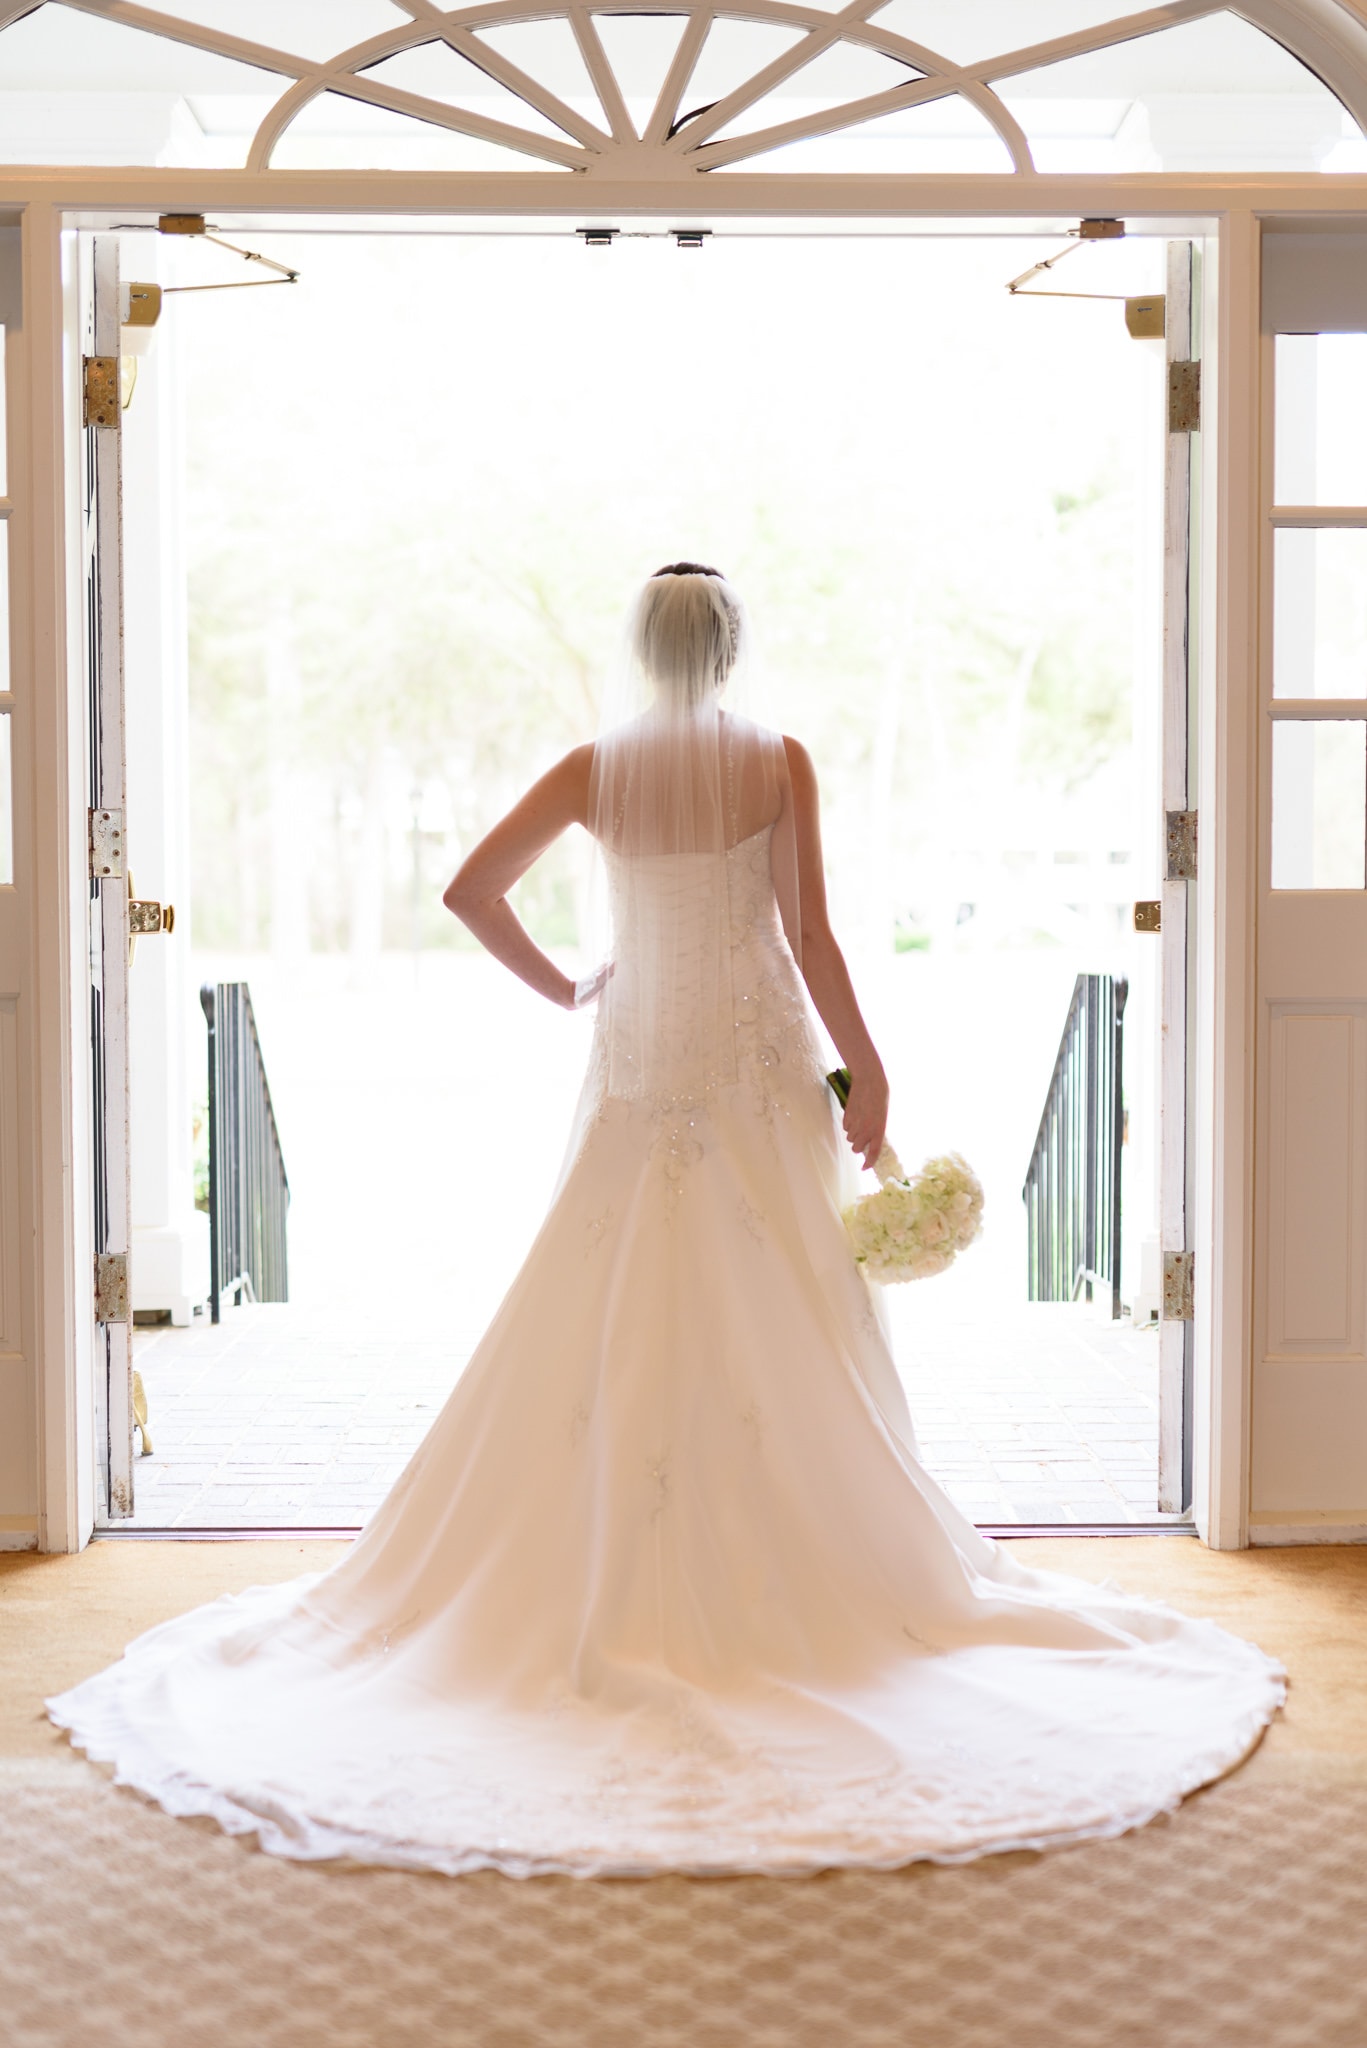 Bride posing in the sunlight from the doorway - Pawleys Plantation